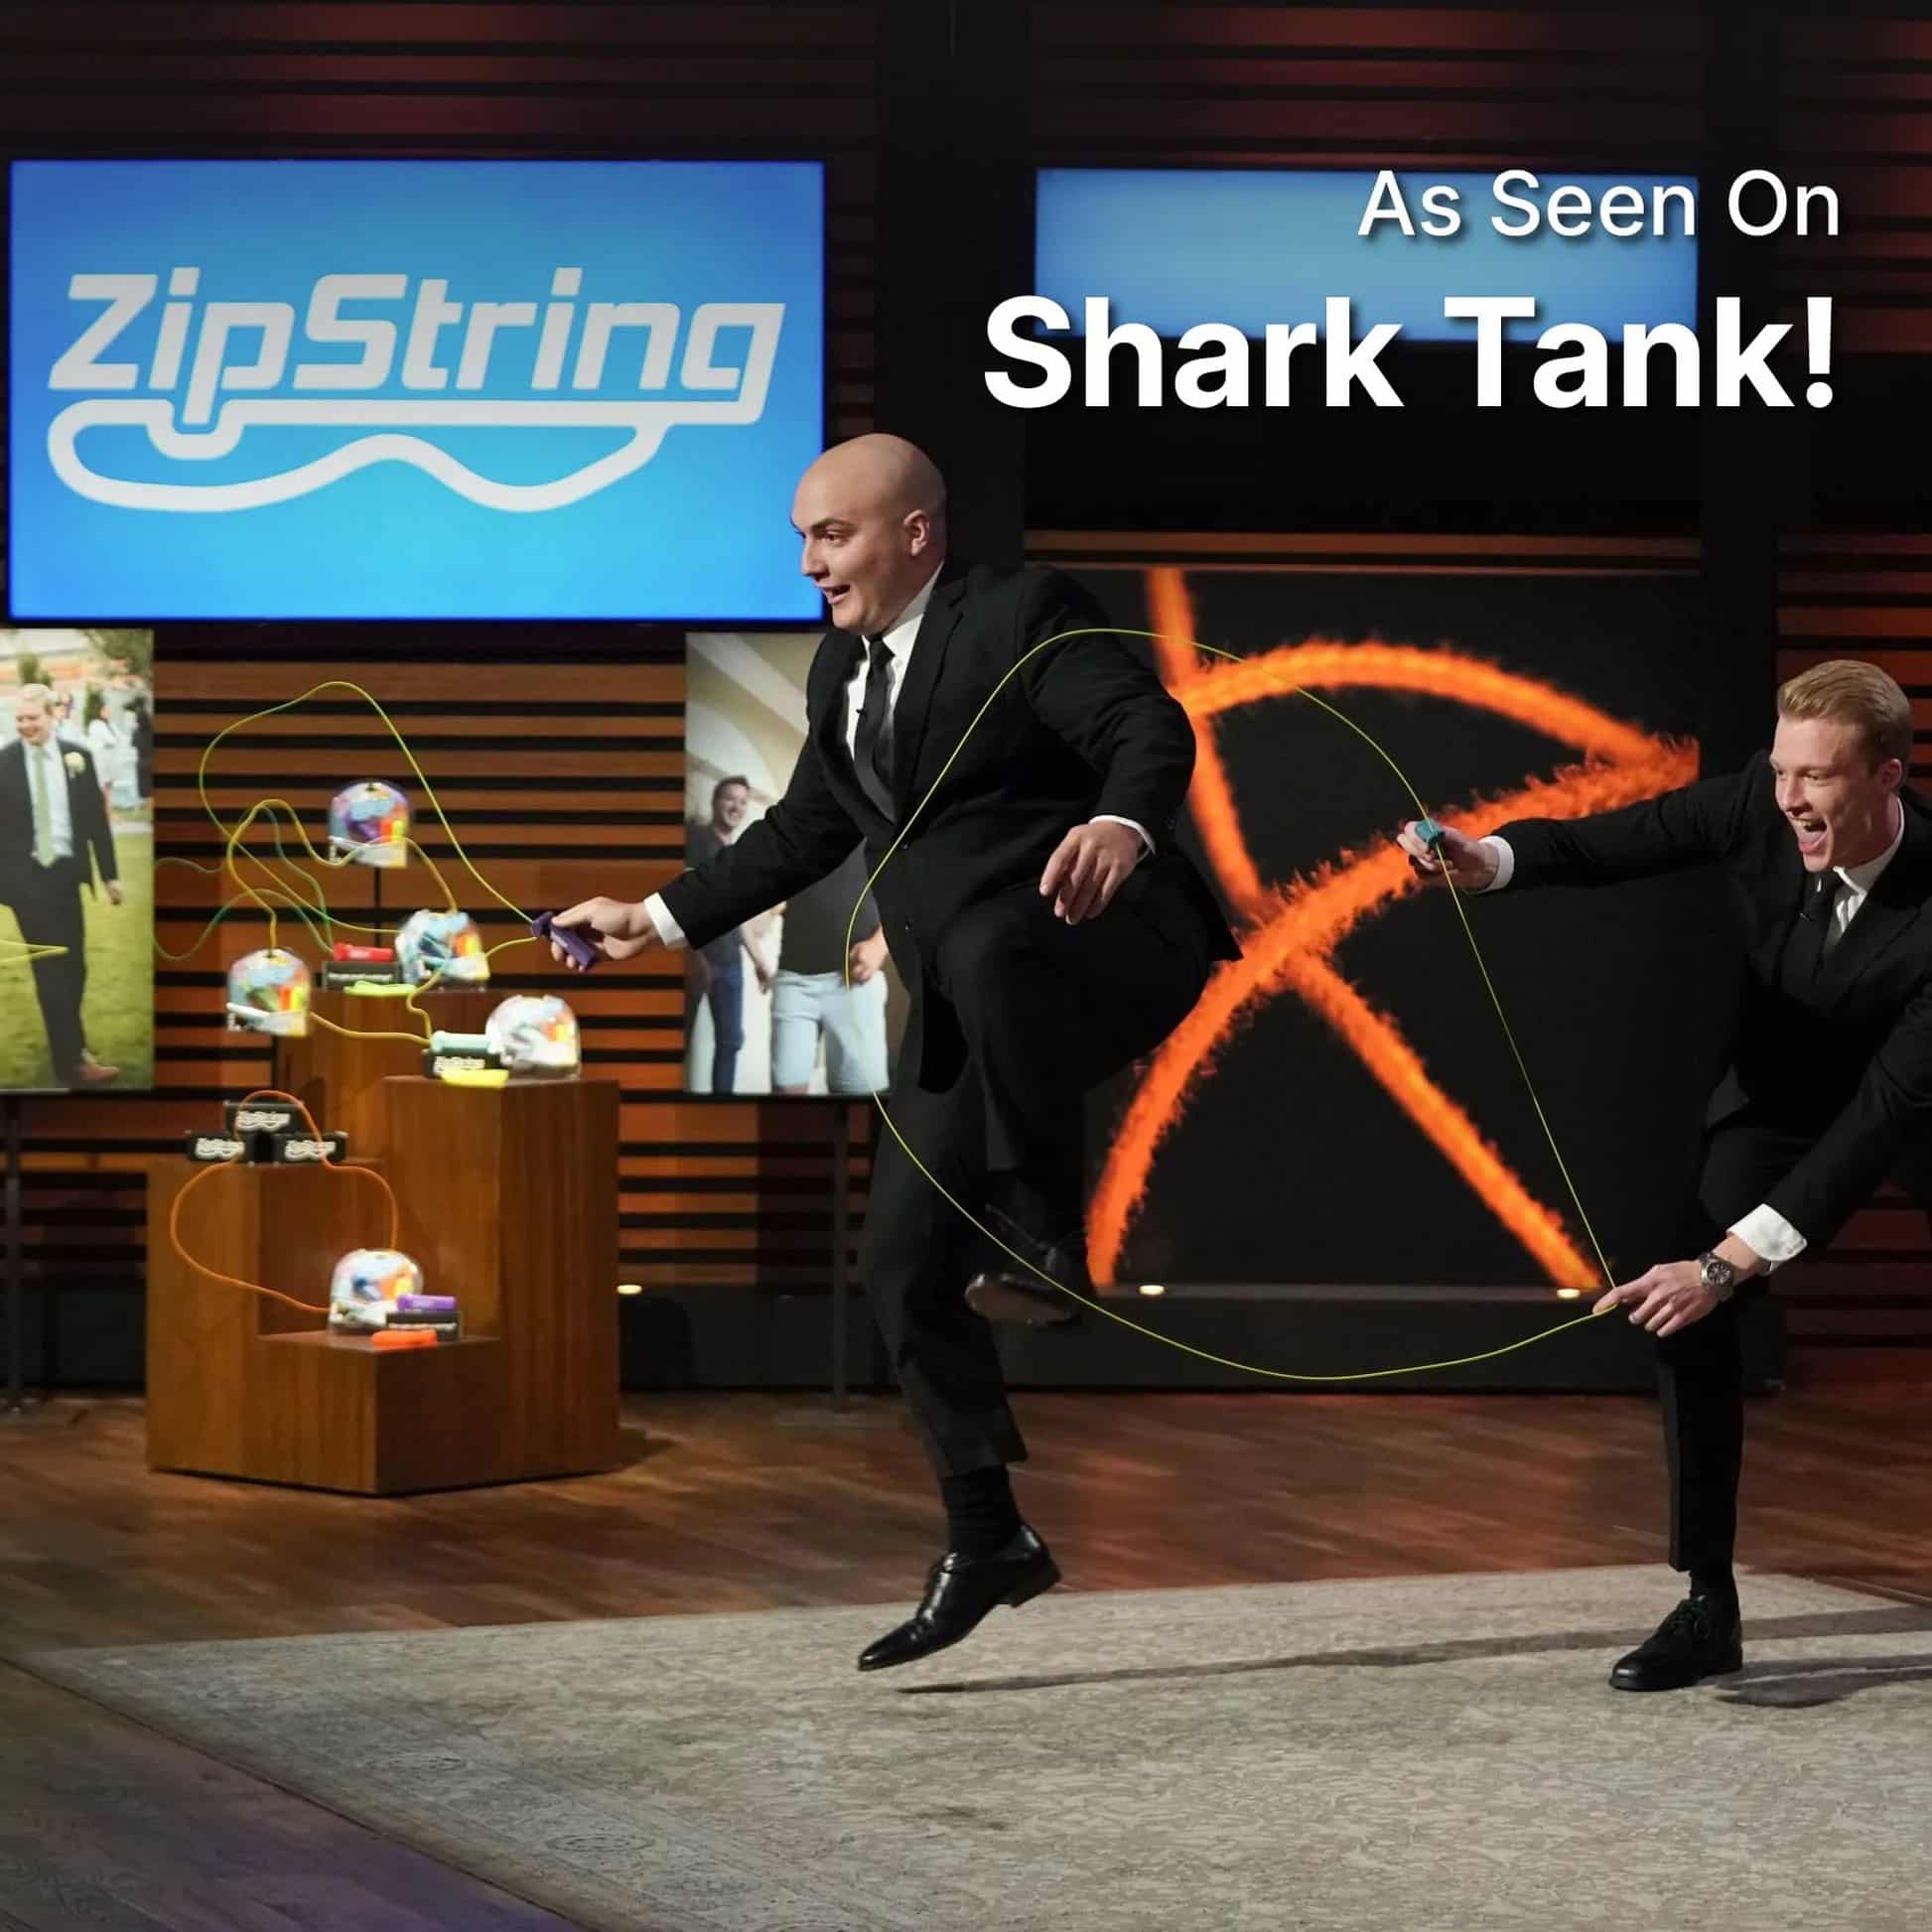 zipstring toy shown on shark tank